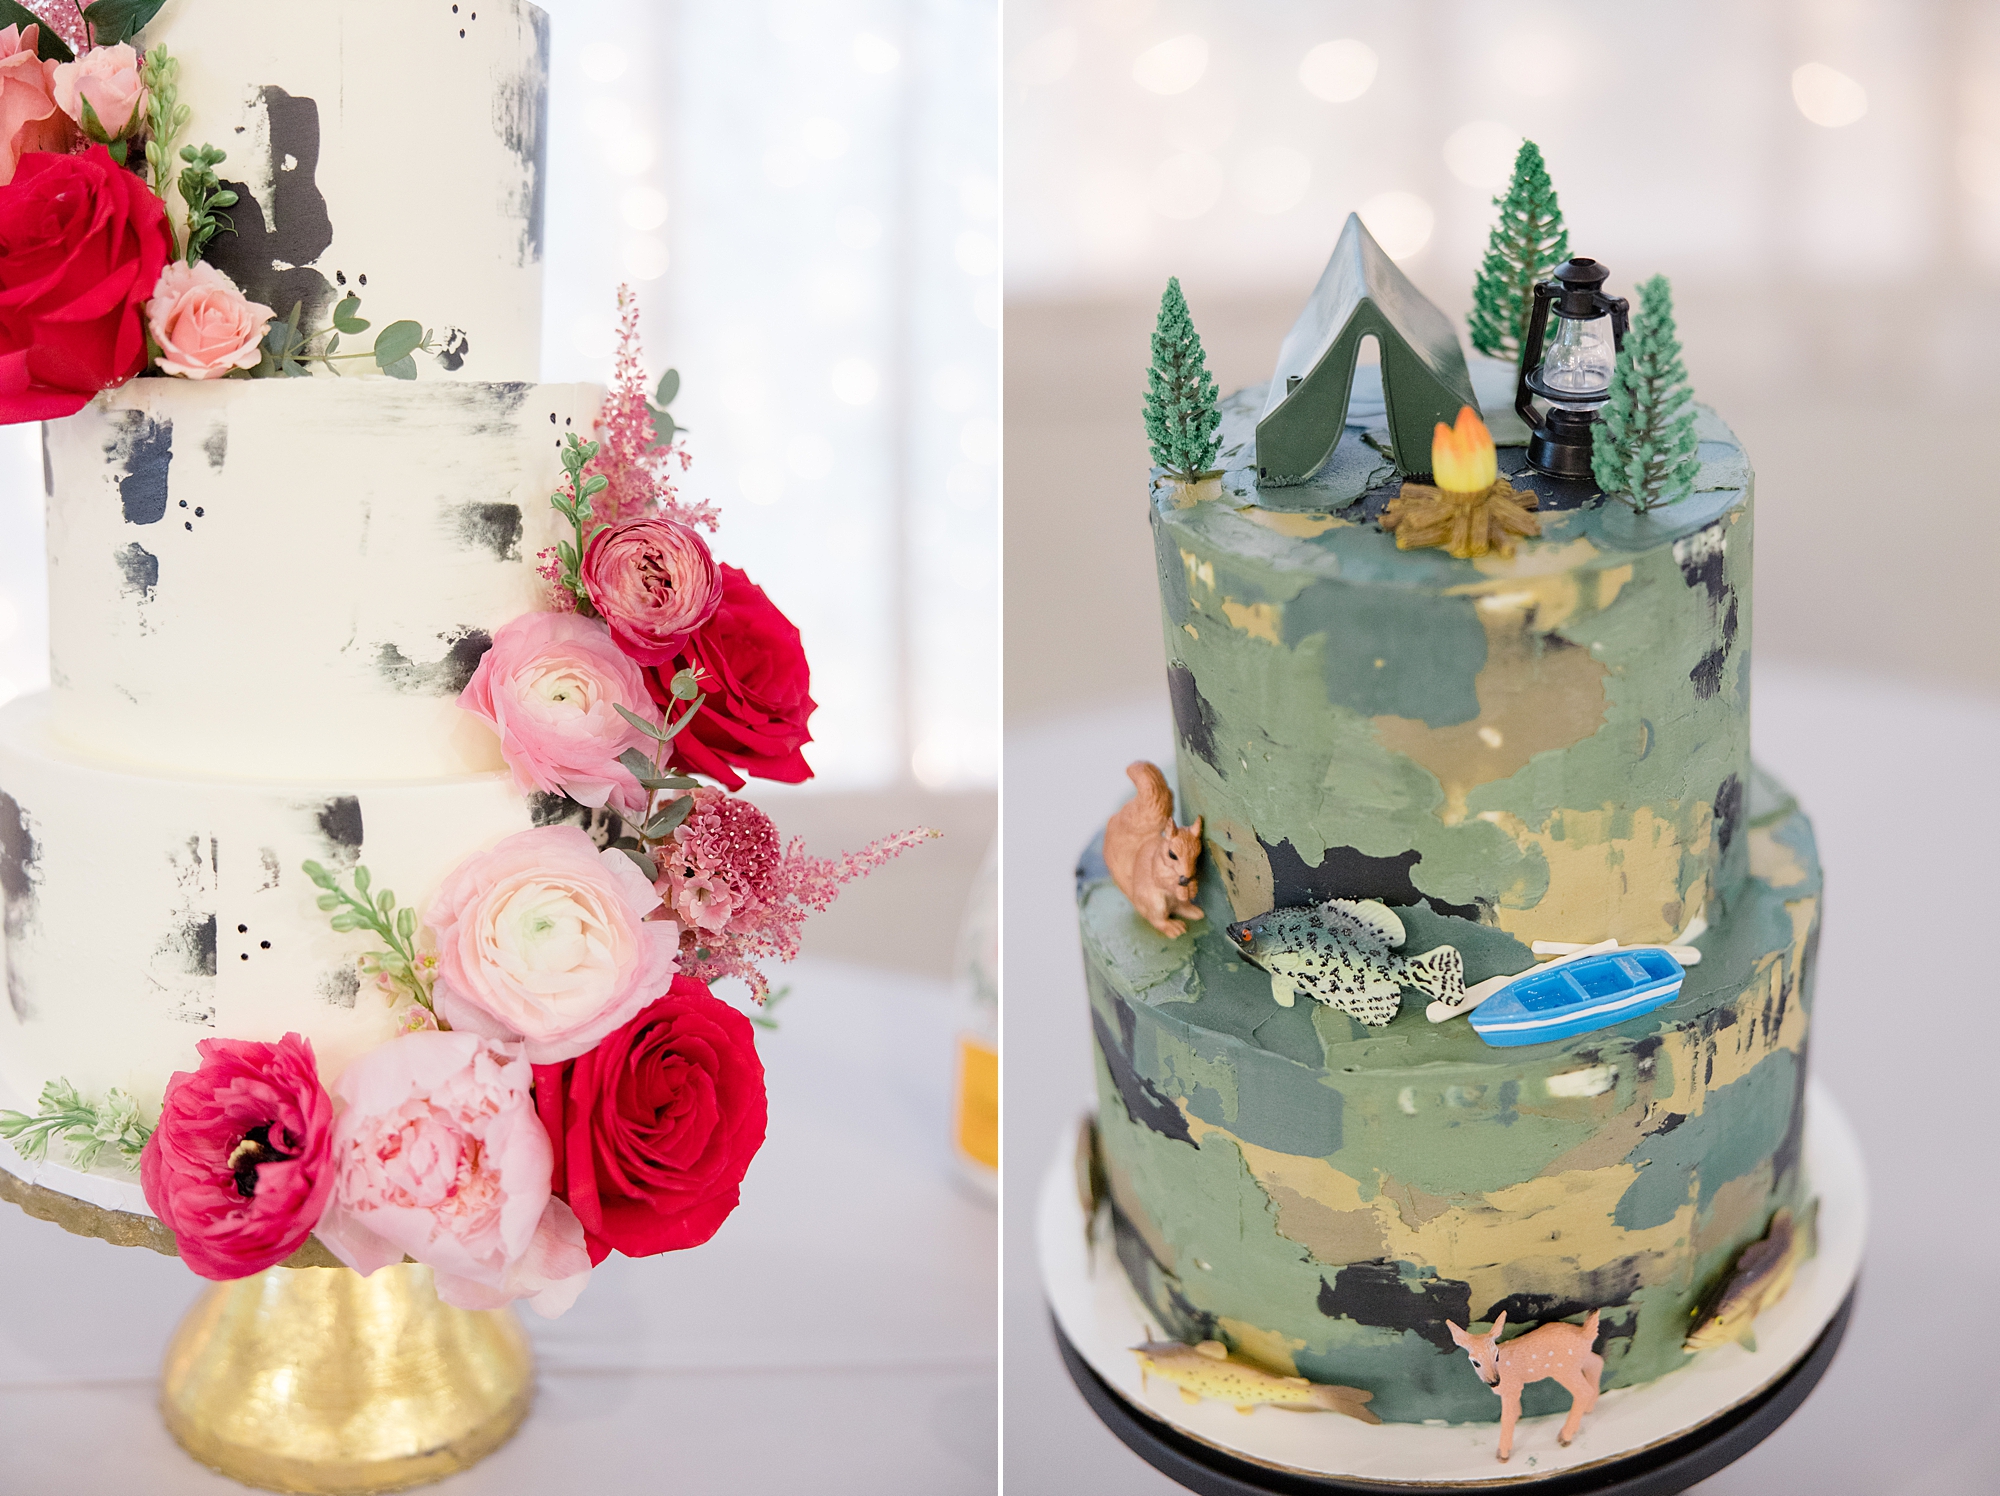 wedding cake and groom's cake for Willow Creek wedding reception 